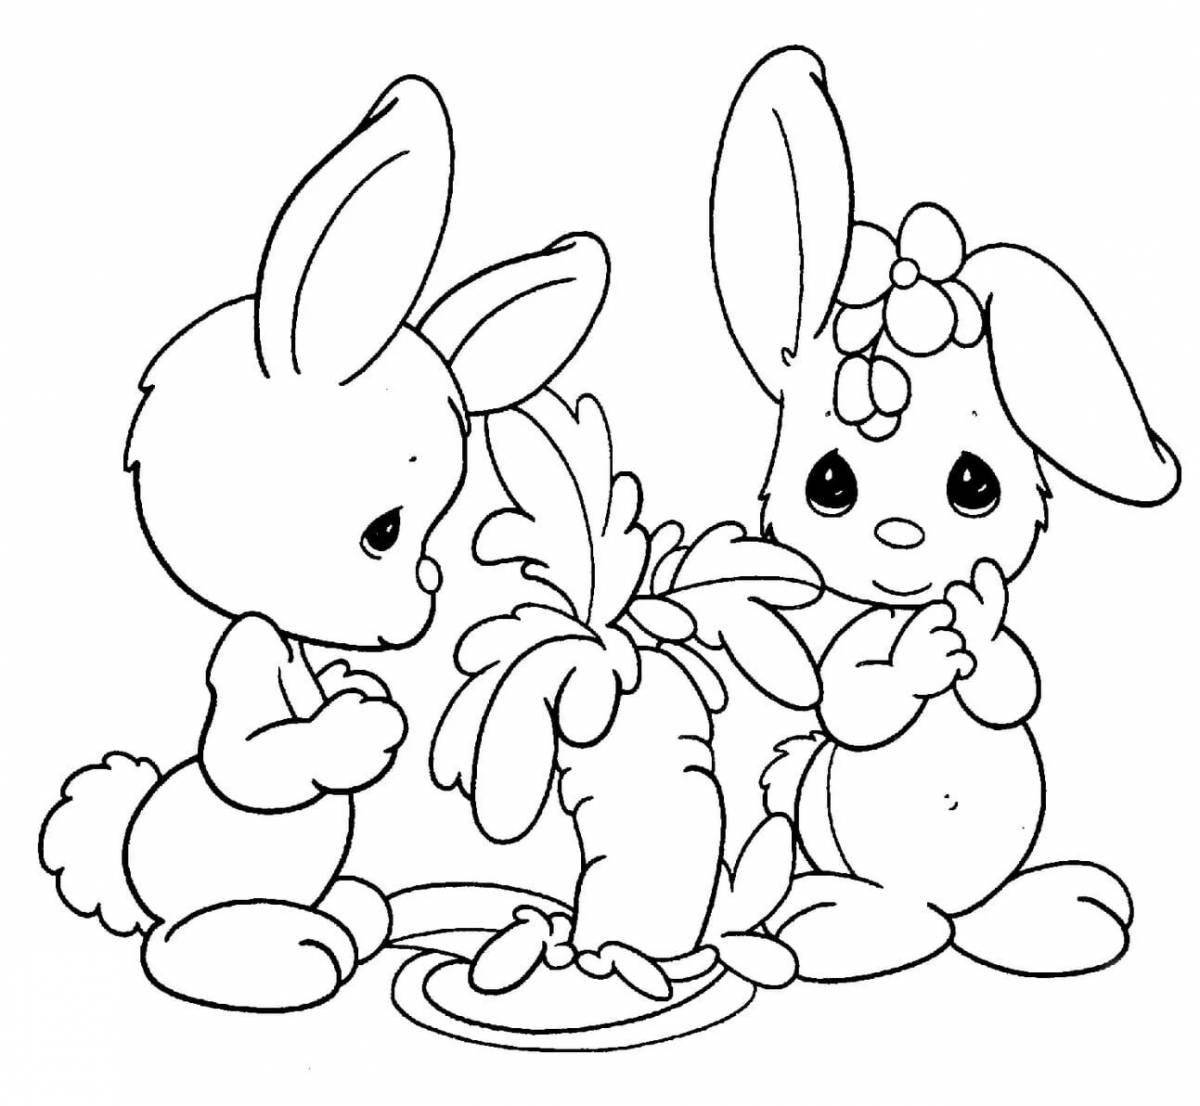 Charming coloring book bunny in a dress